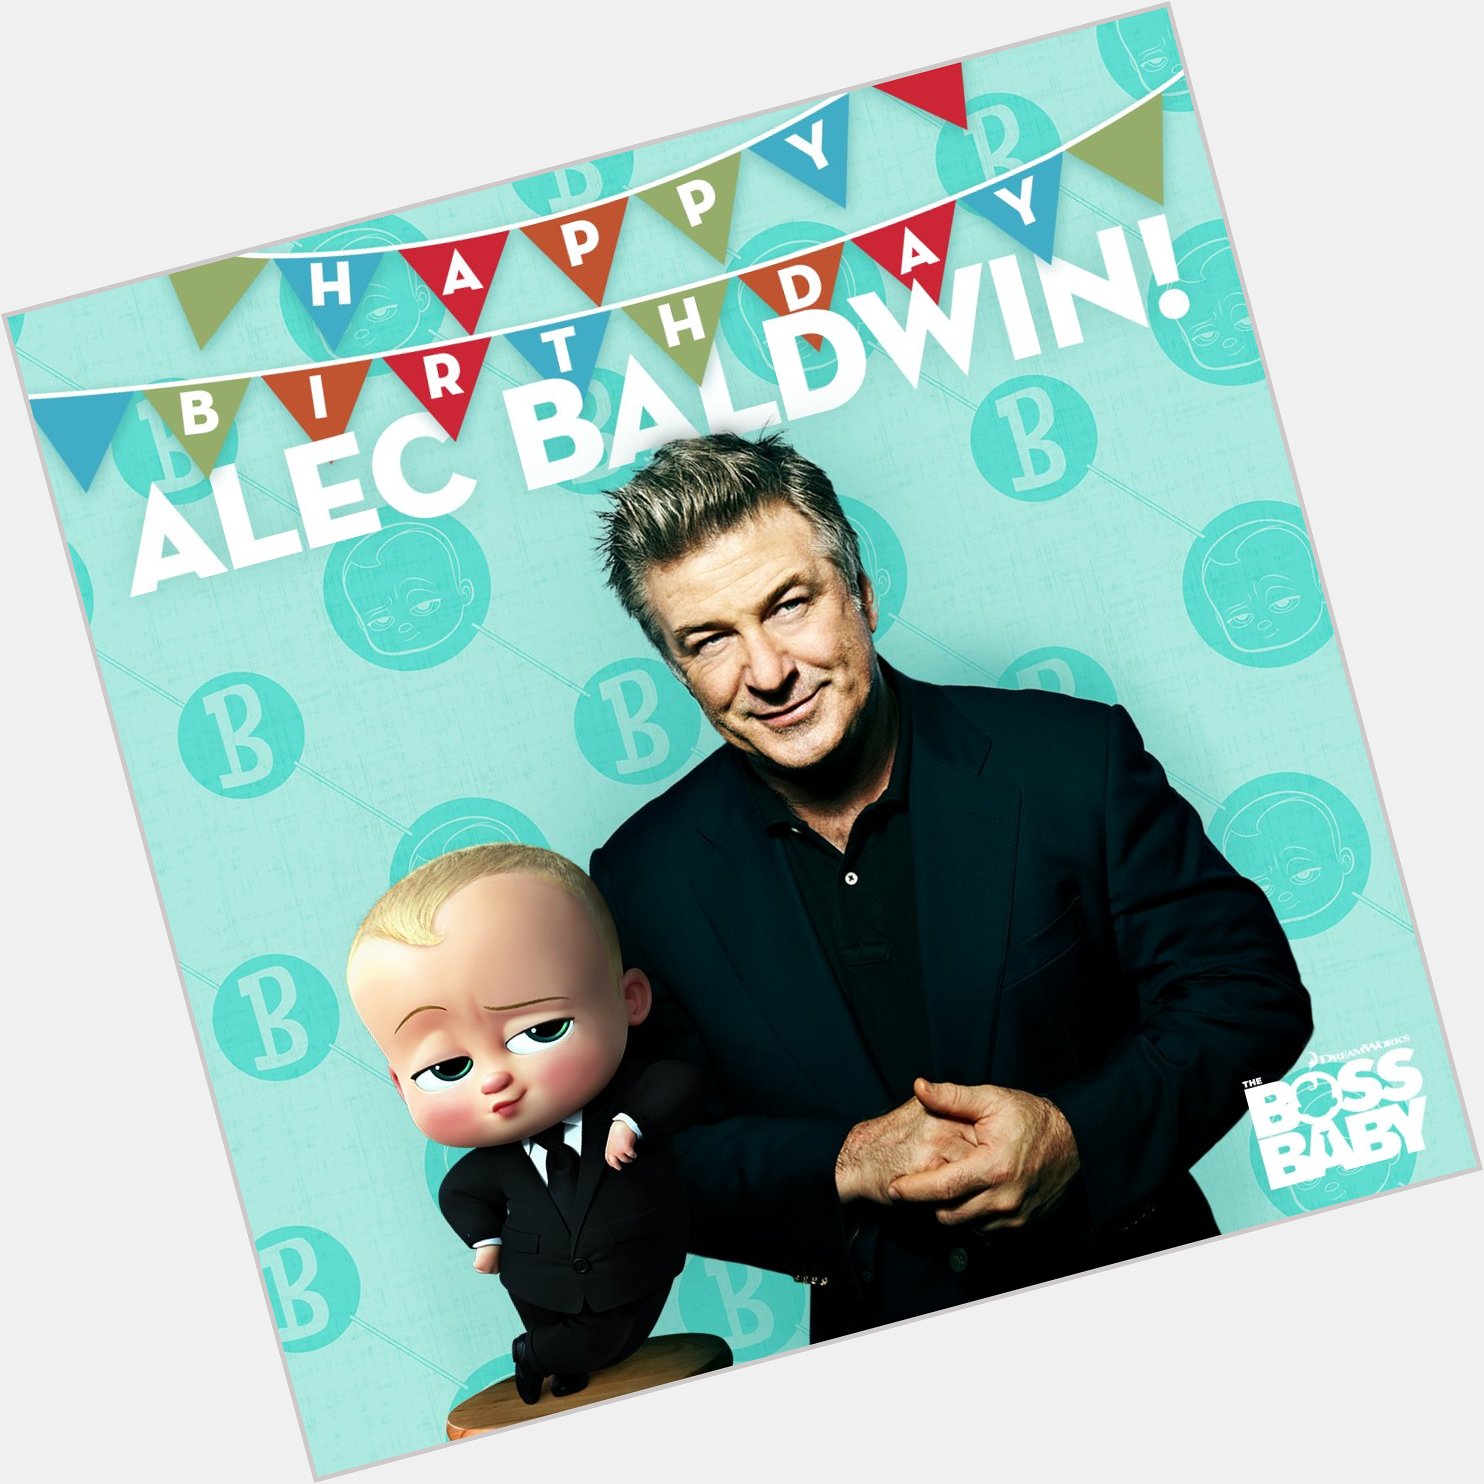 Happy birthday to the Boss! Best wishes to very own Alec Baldwin. 